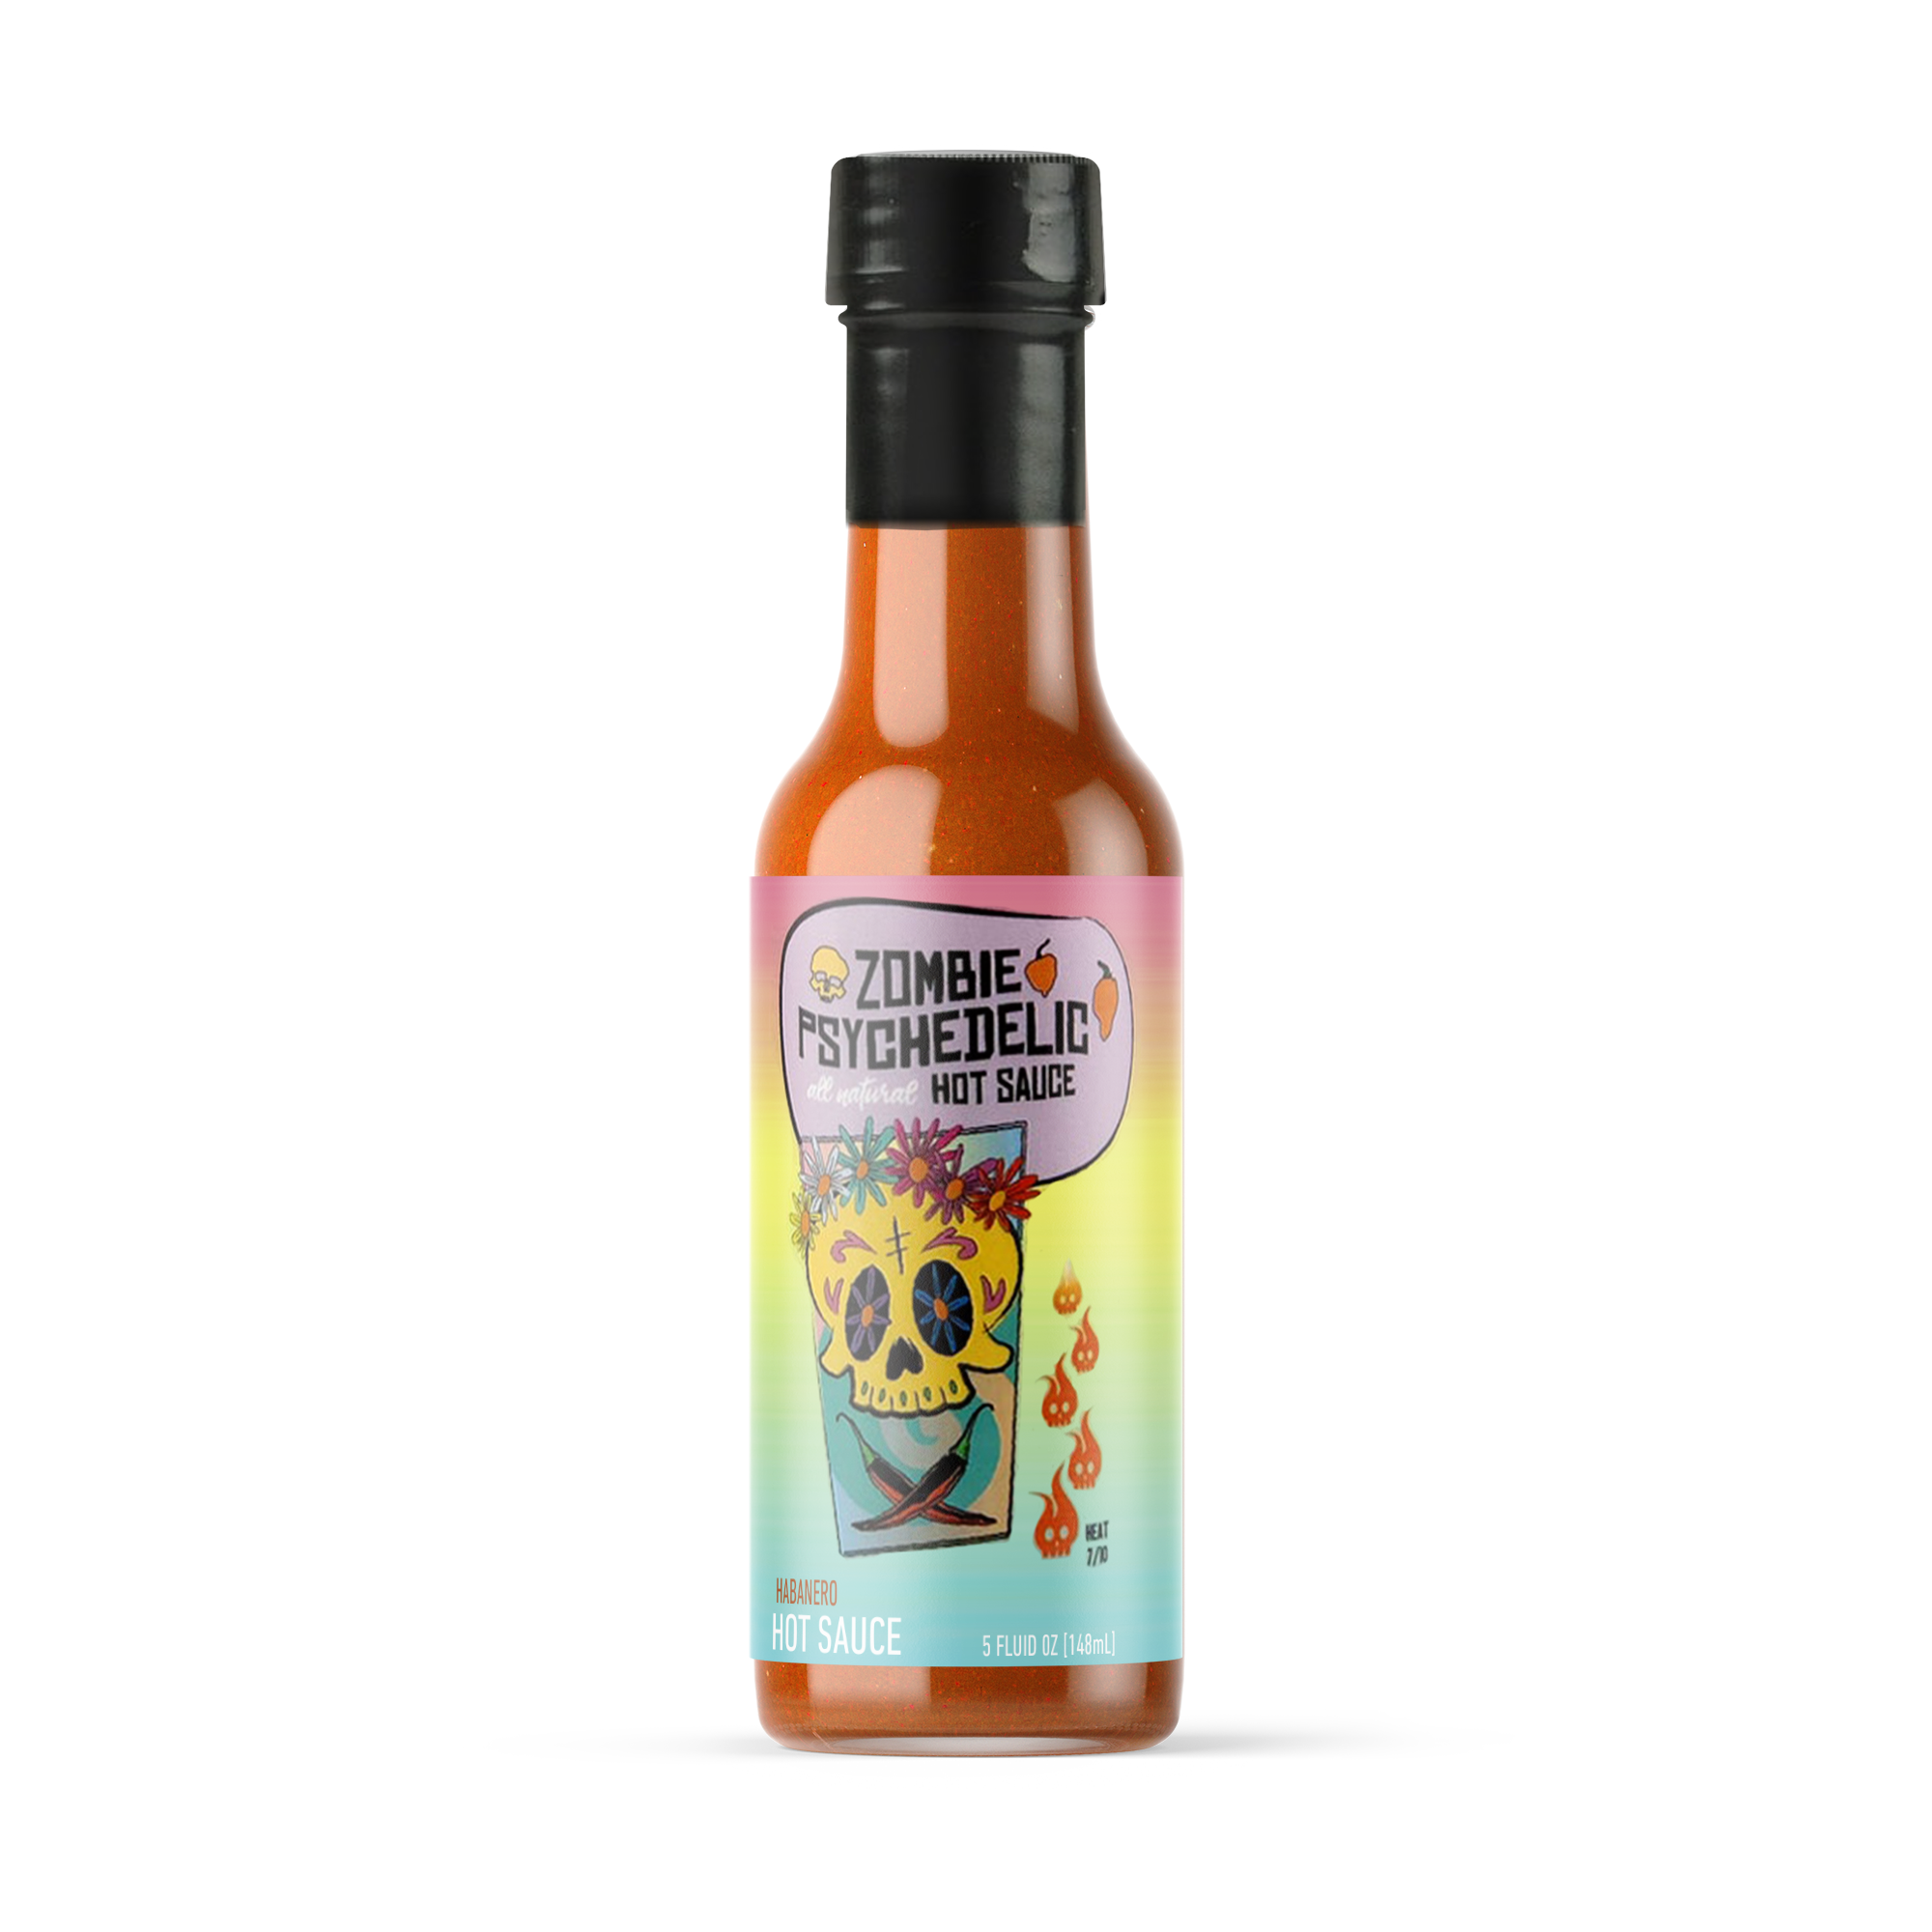 Zombie Psychedelic Hot Sauce